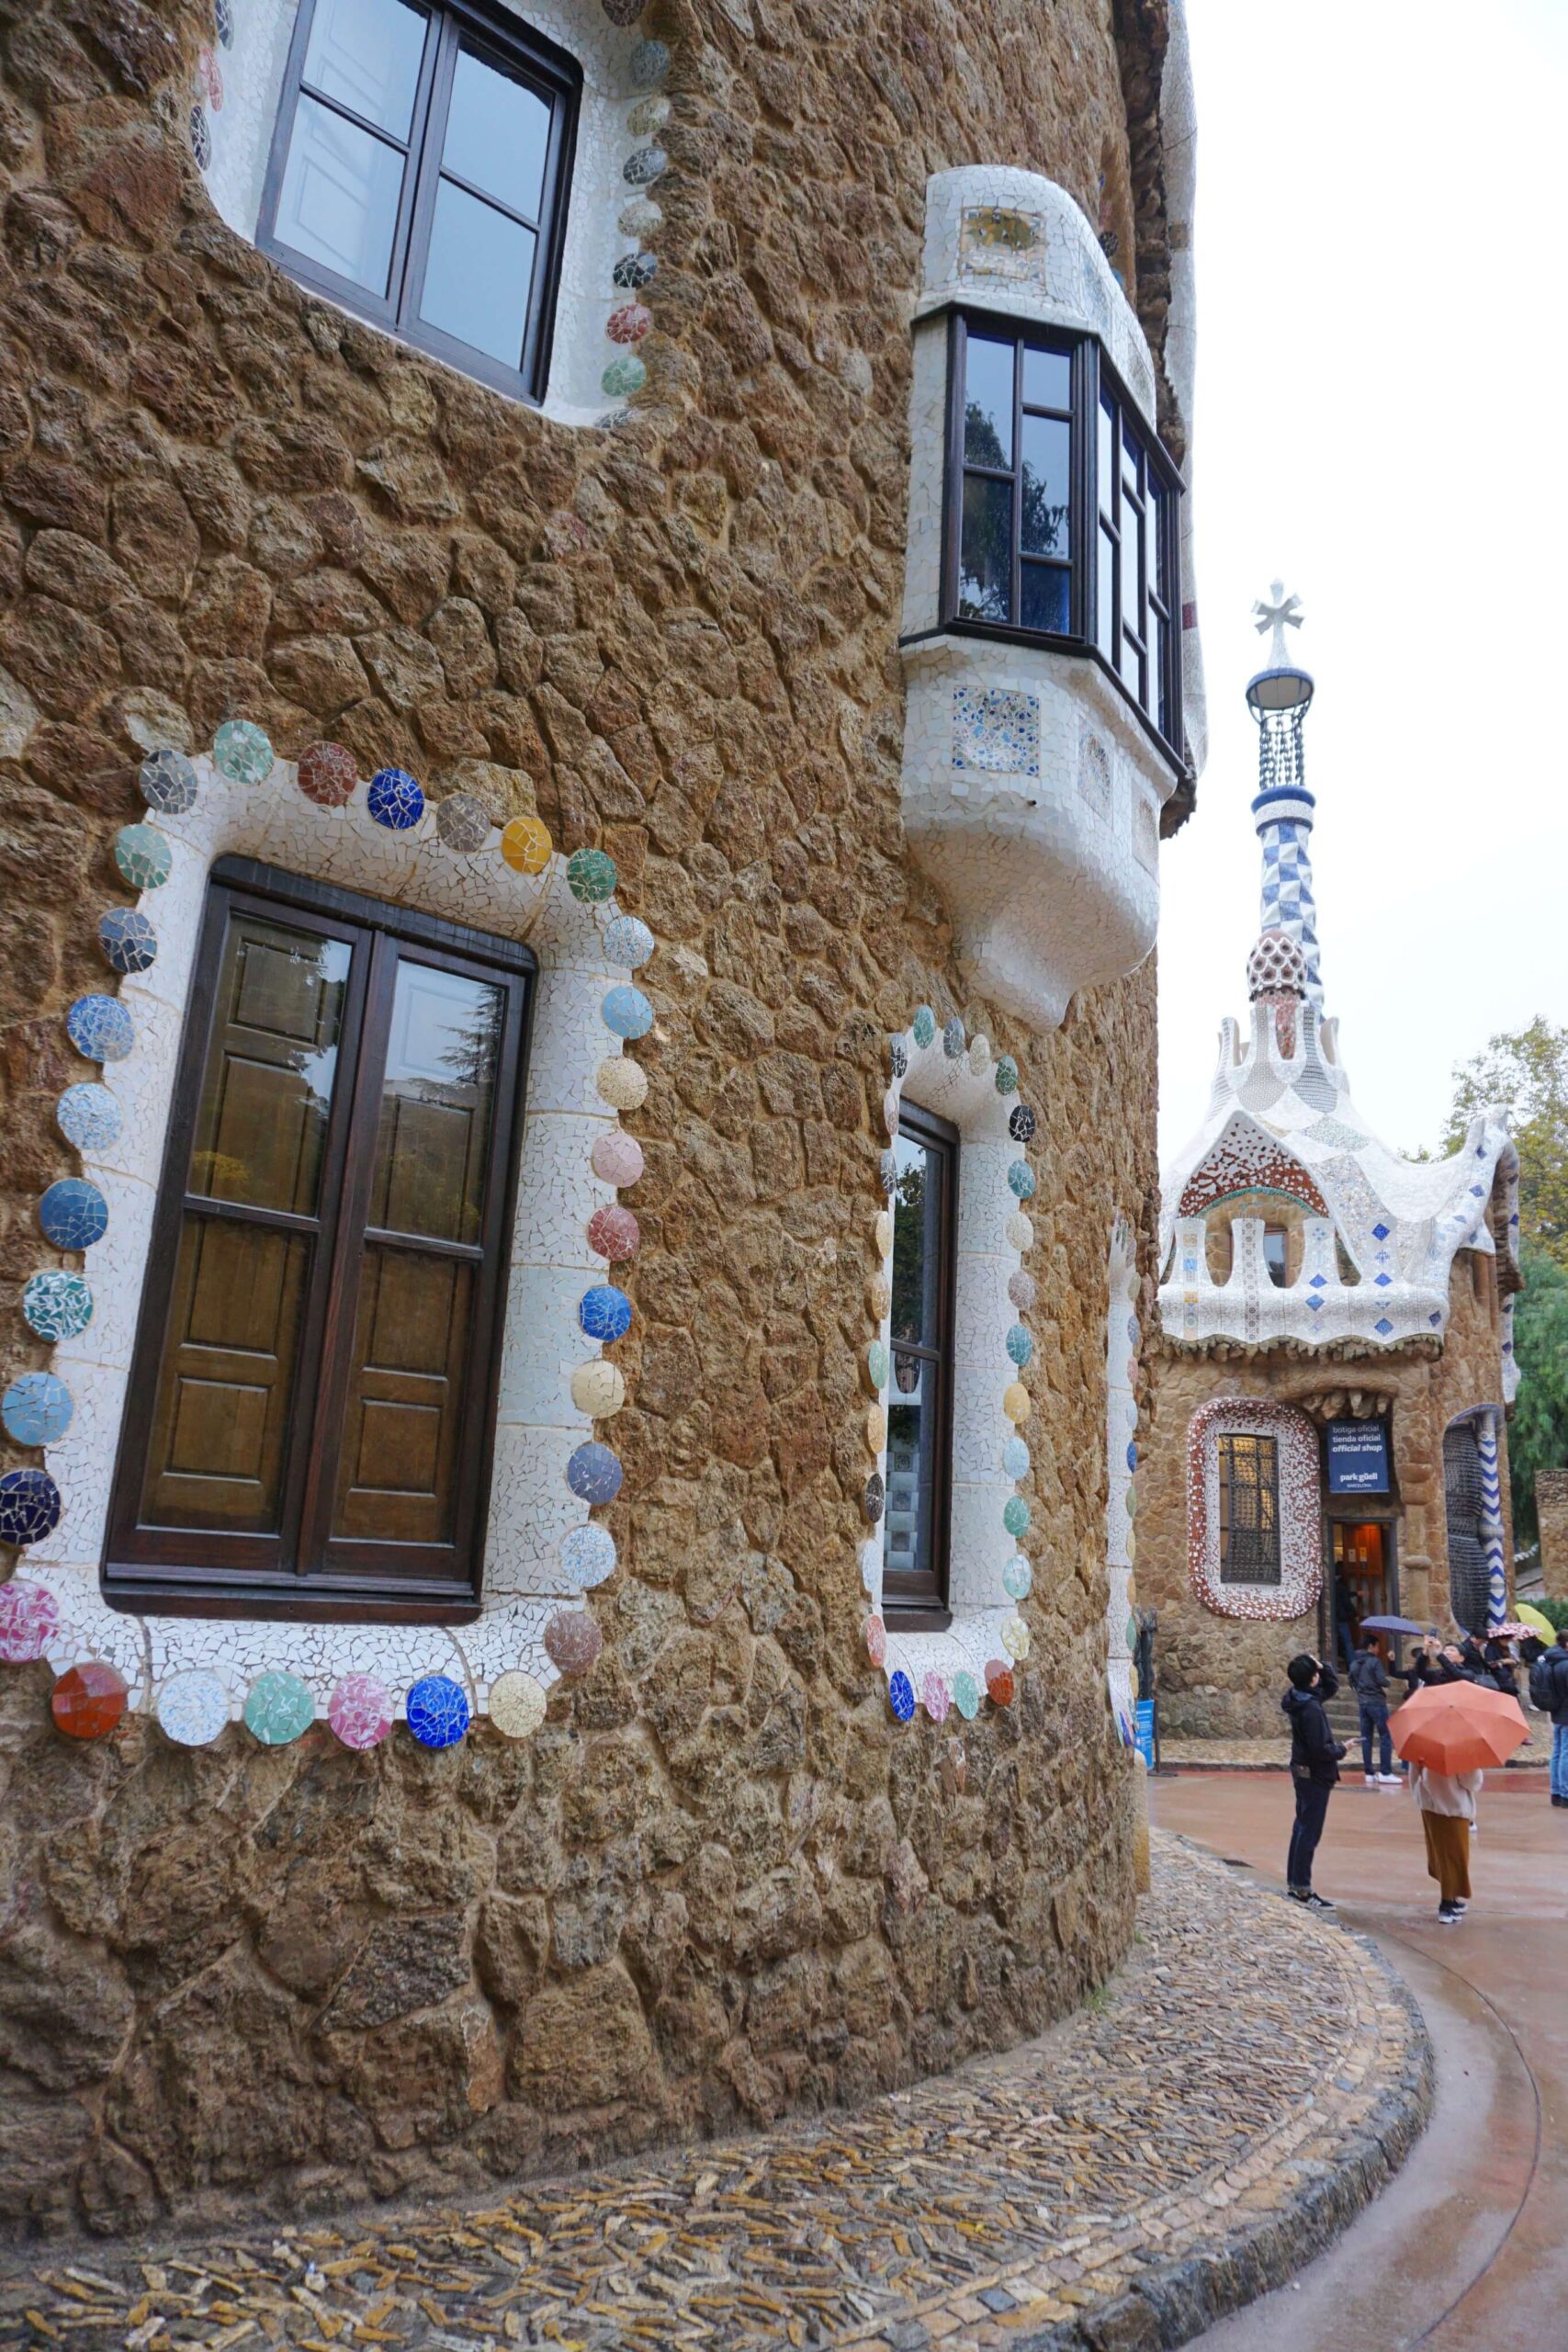 The Porter's Lodge, Parc Guell, Barcelona